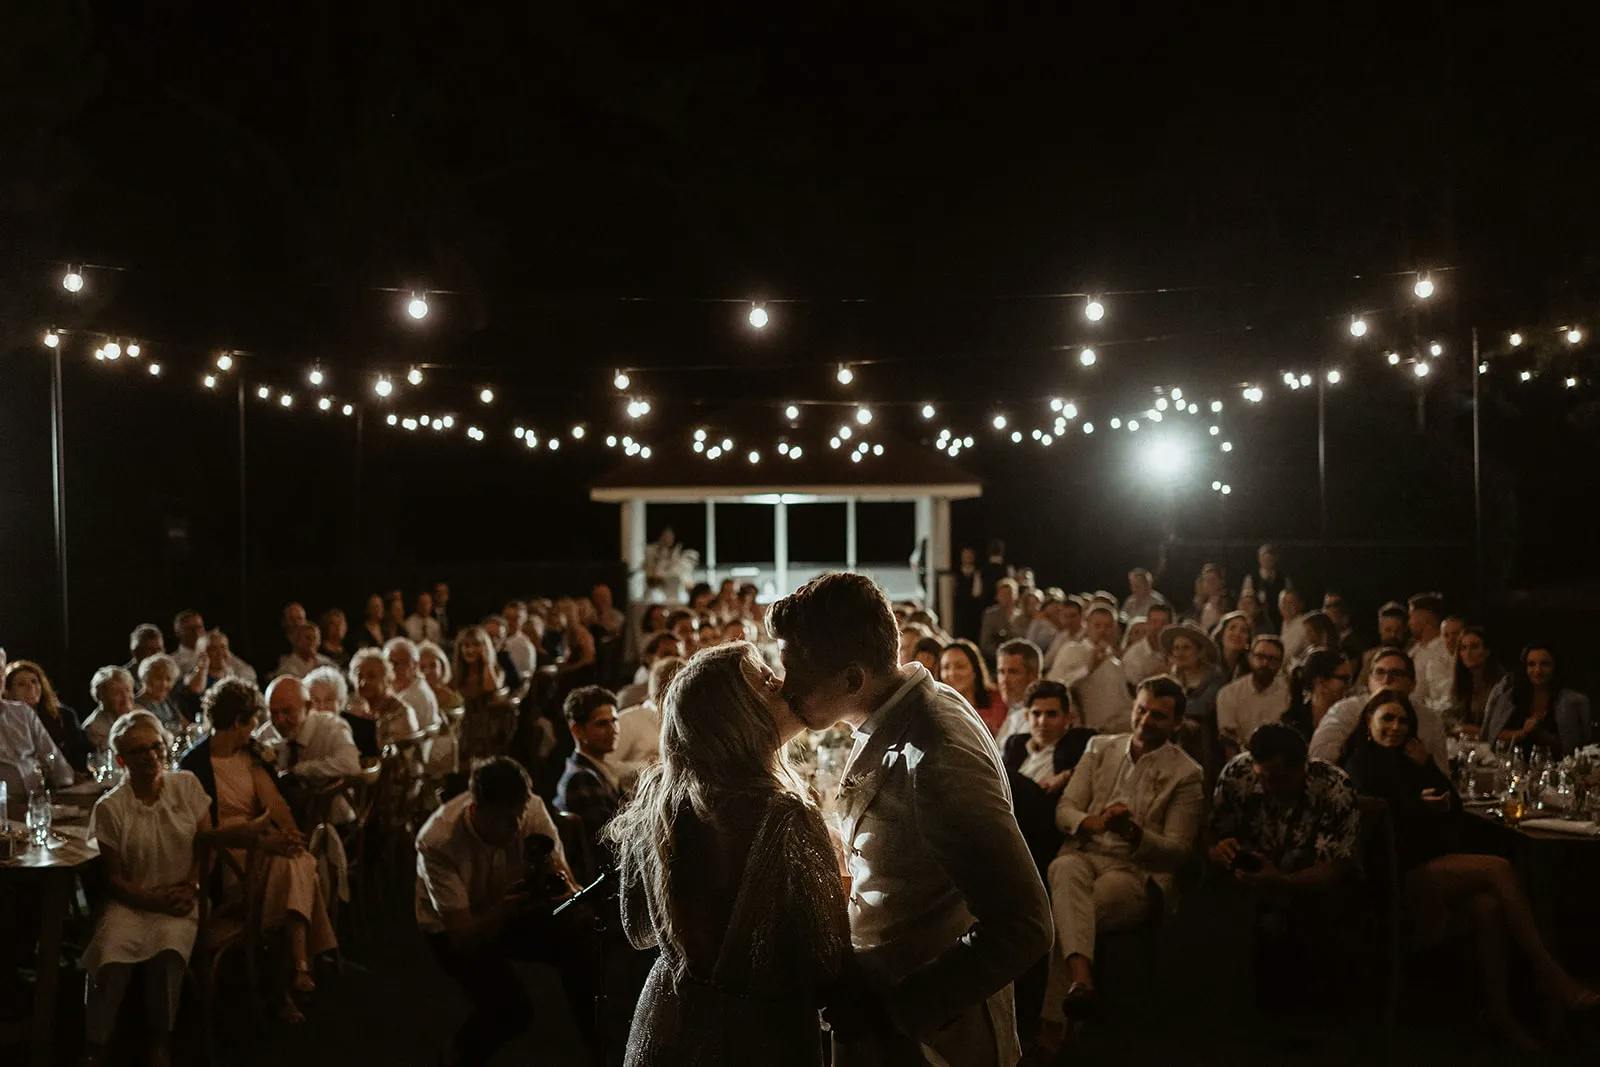 A couple shares a kiss under string lights, surrounded by a large seated audience in an outdoor nighttime setting. The scene has a warm, intimate atmosphere, with fairy lights casting a gentle glow over the gathering.